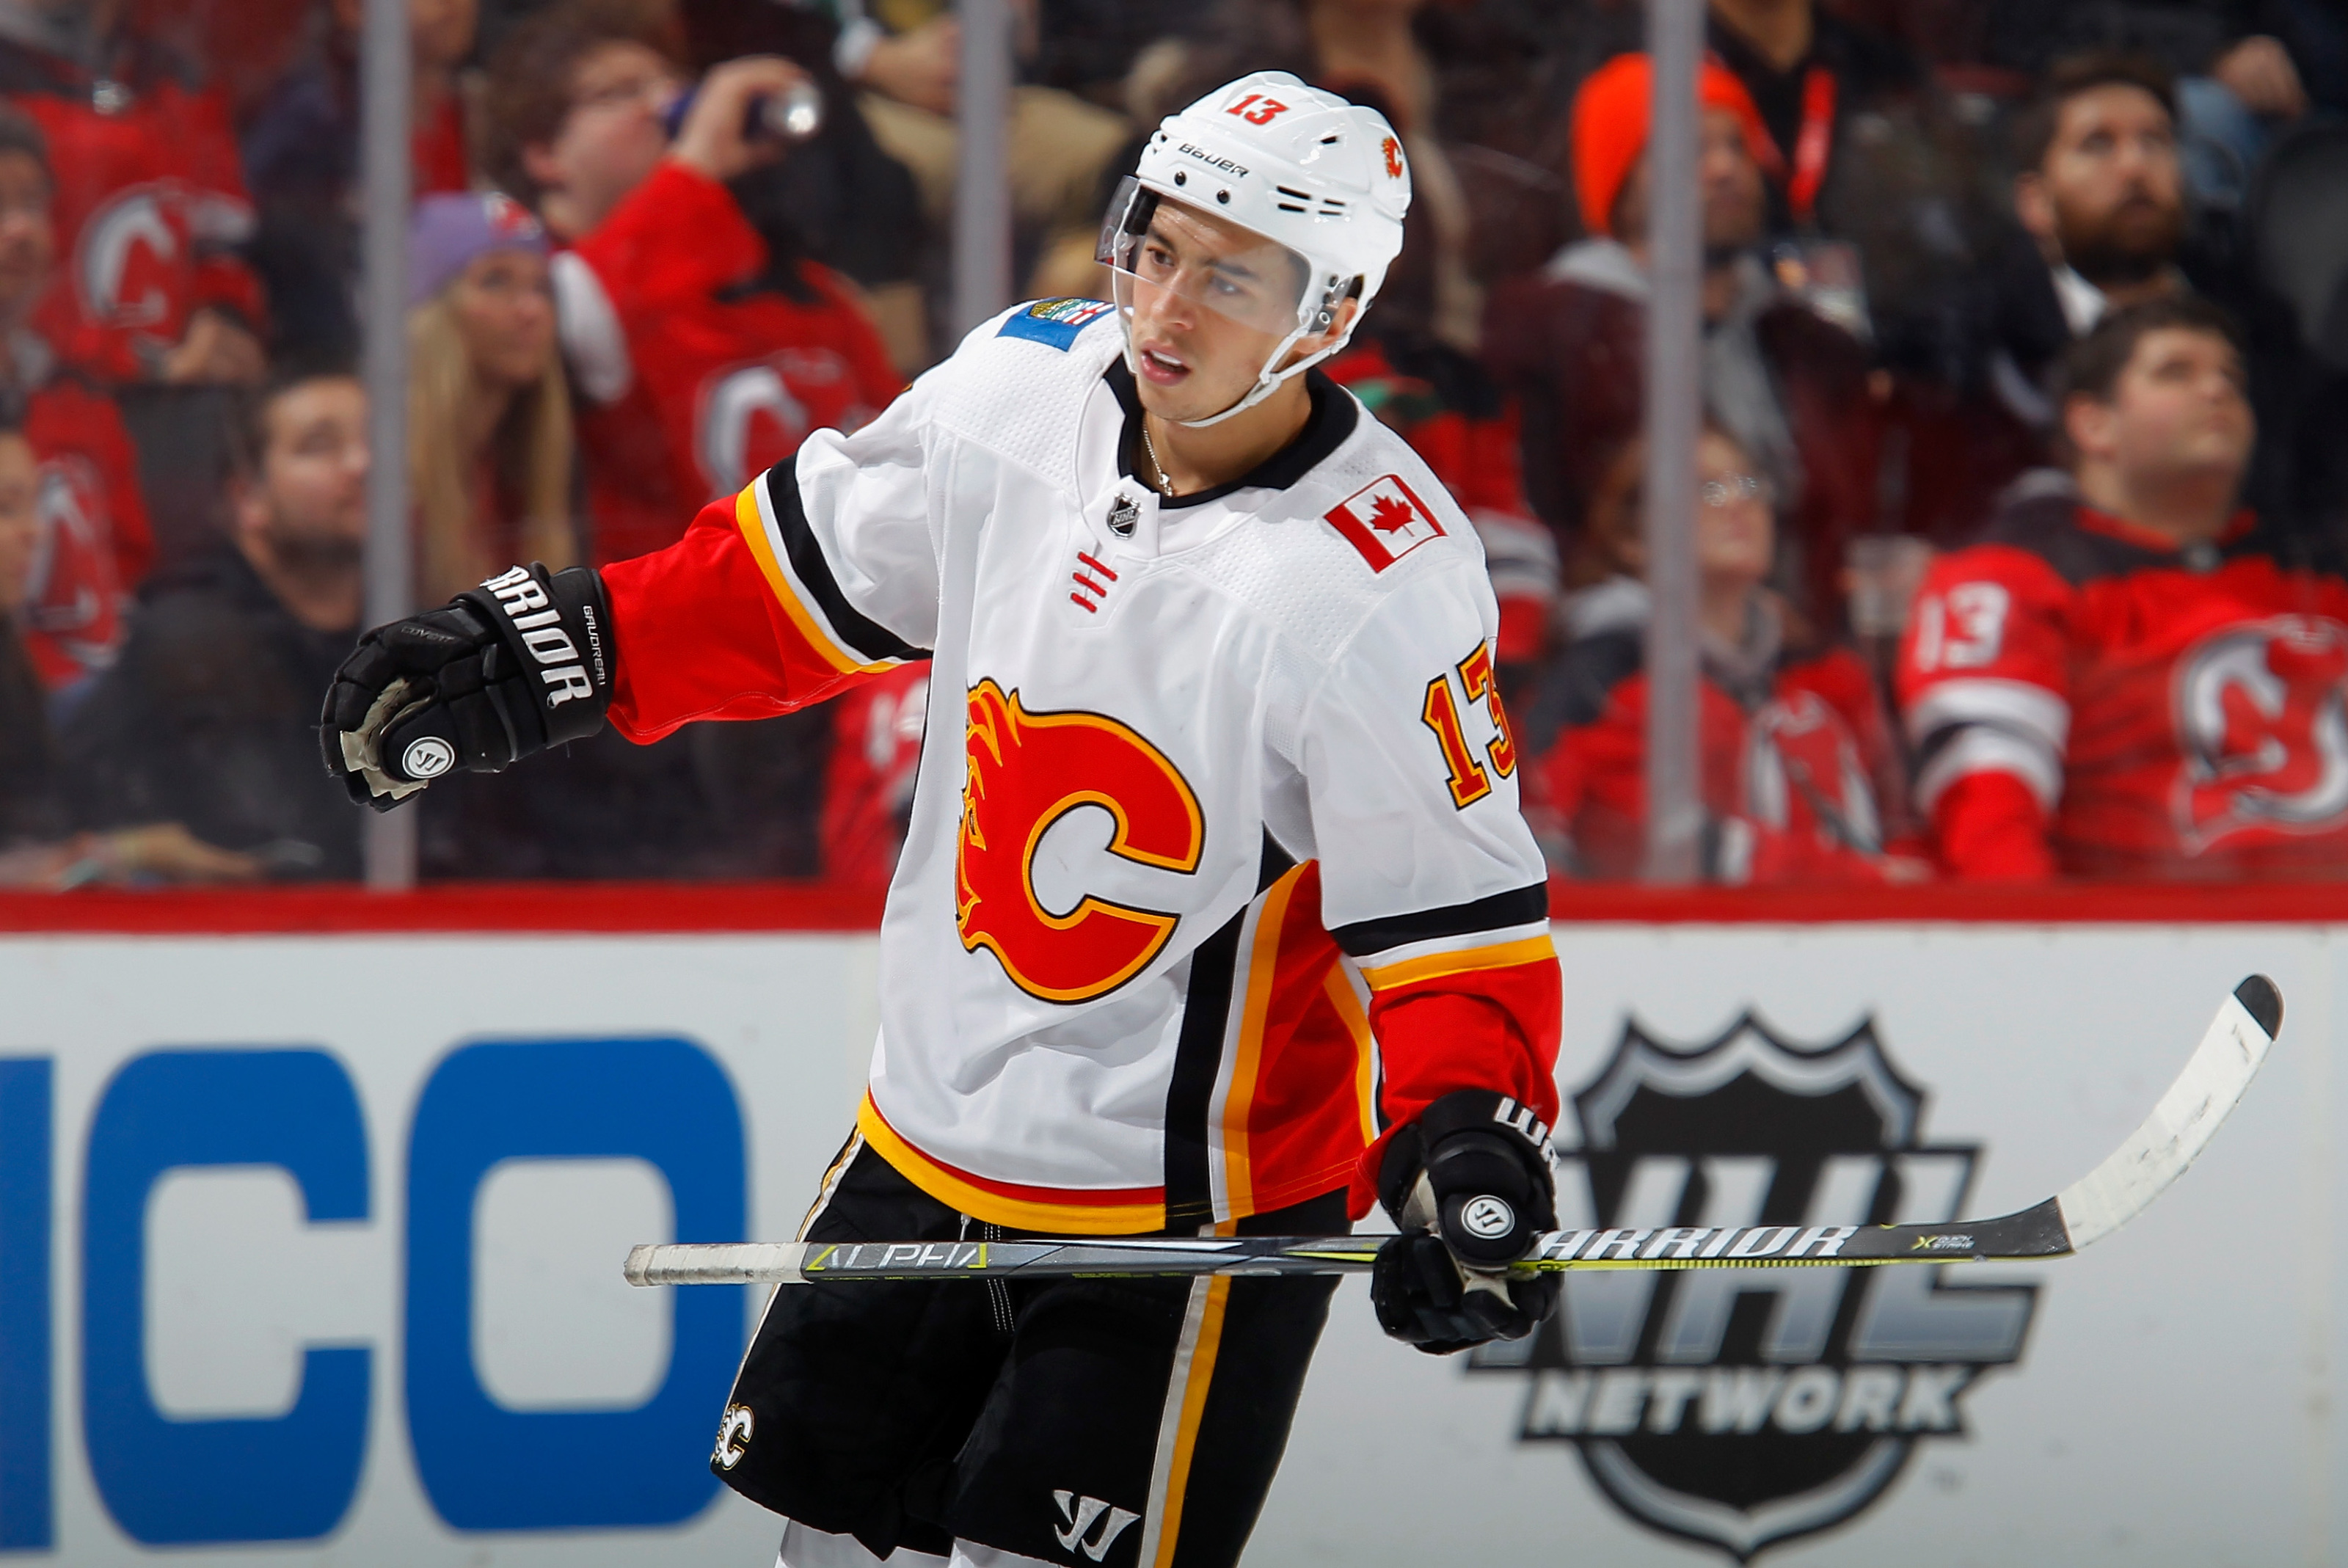 A couple Johnny Gaudreau jersey swaps I did in preparation of his